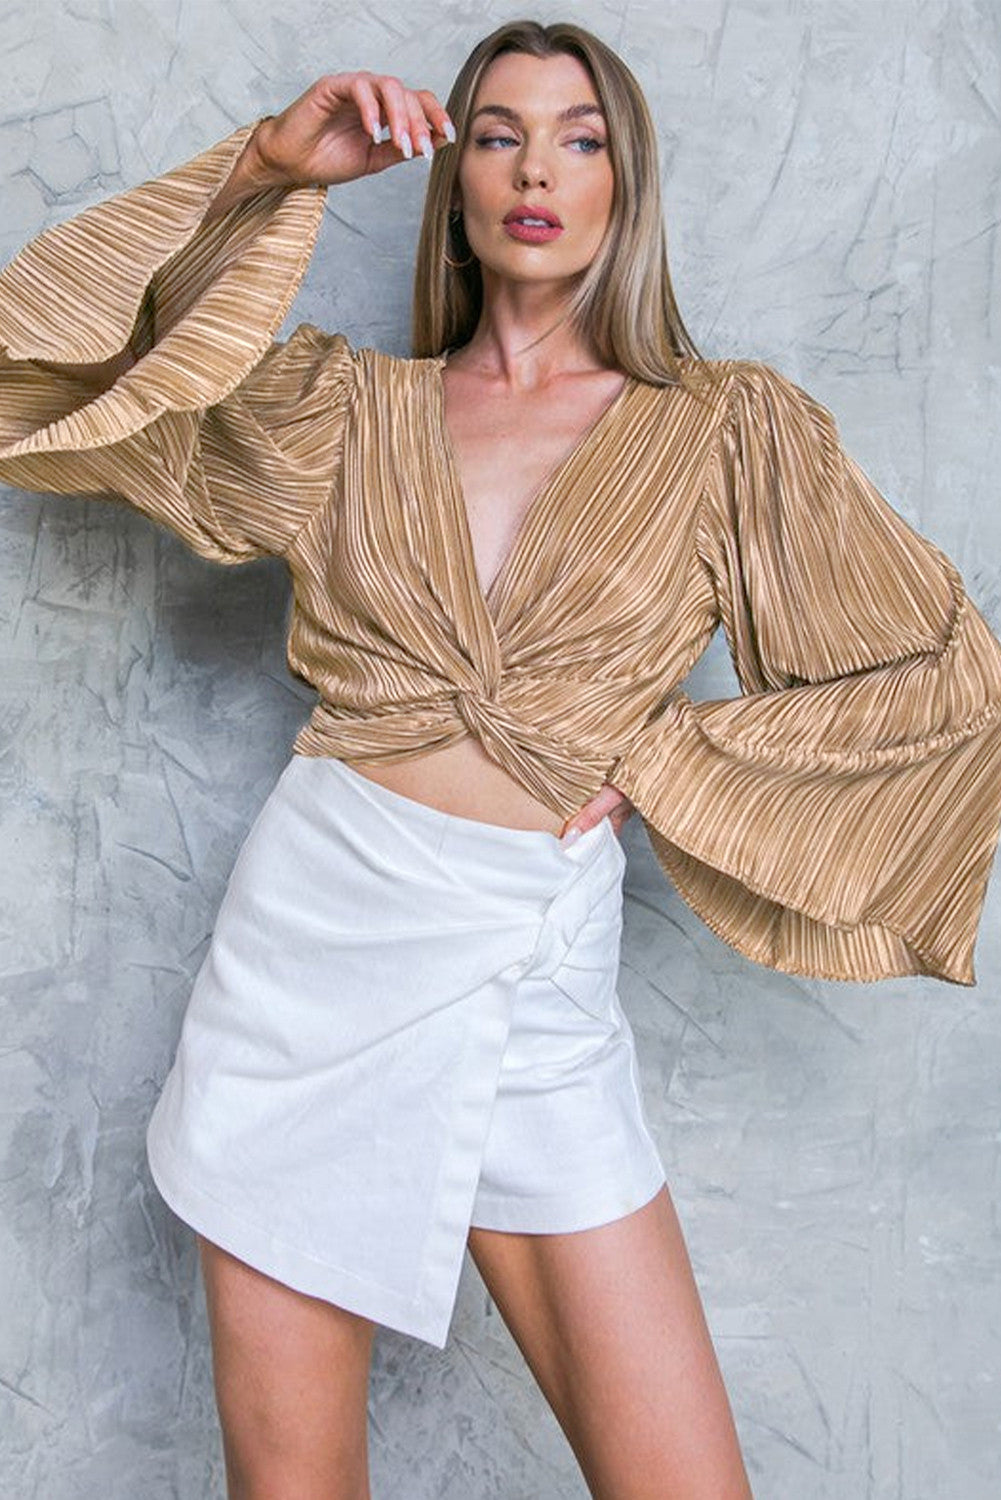 Pleated Bell Sleeve Blouse